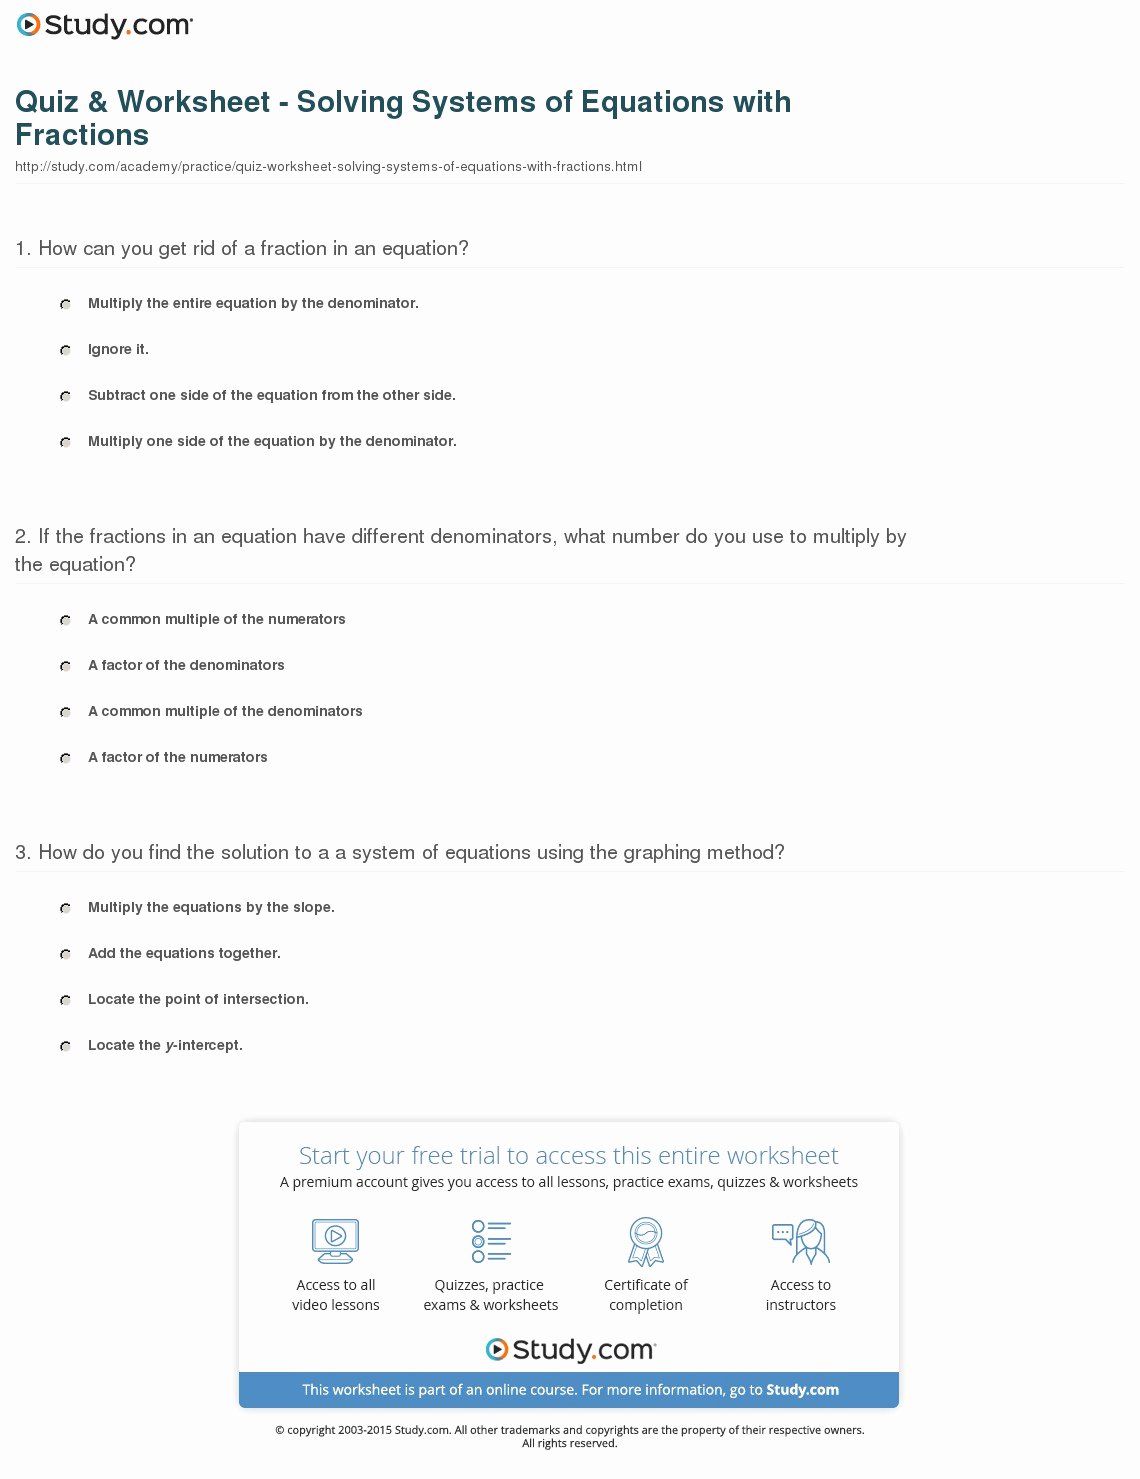 Solving Equations with Fractions Worksheet Beautiful Quiz &amp; Worksheet solving Systems Of Equations with